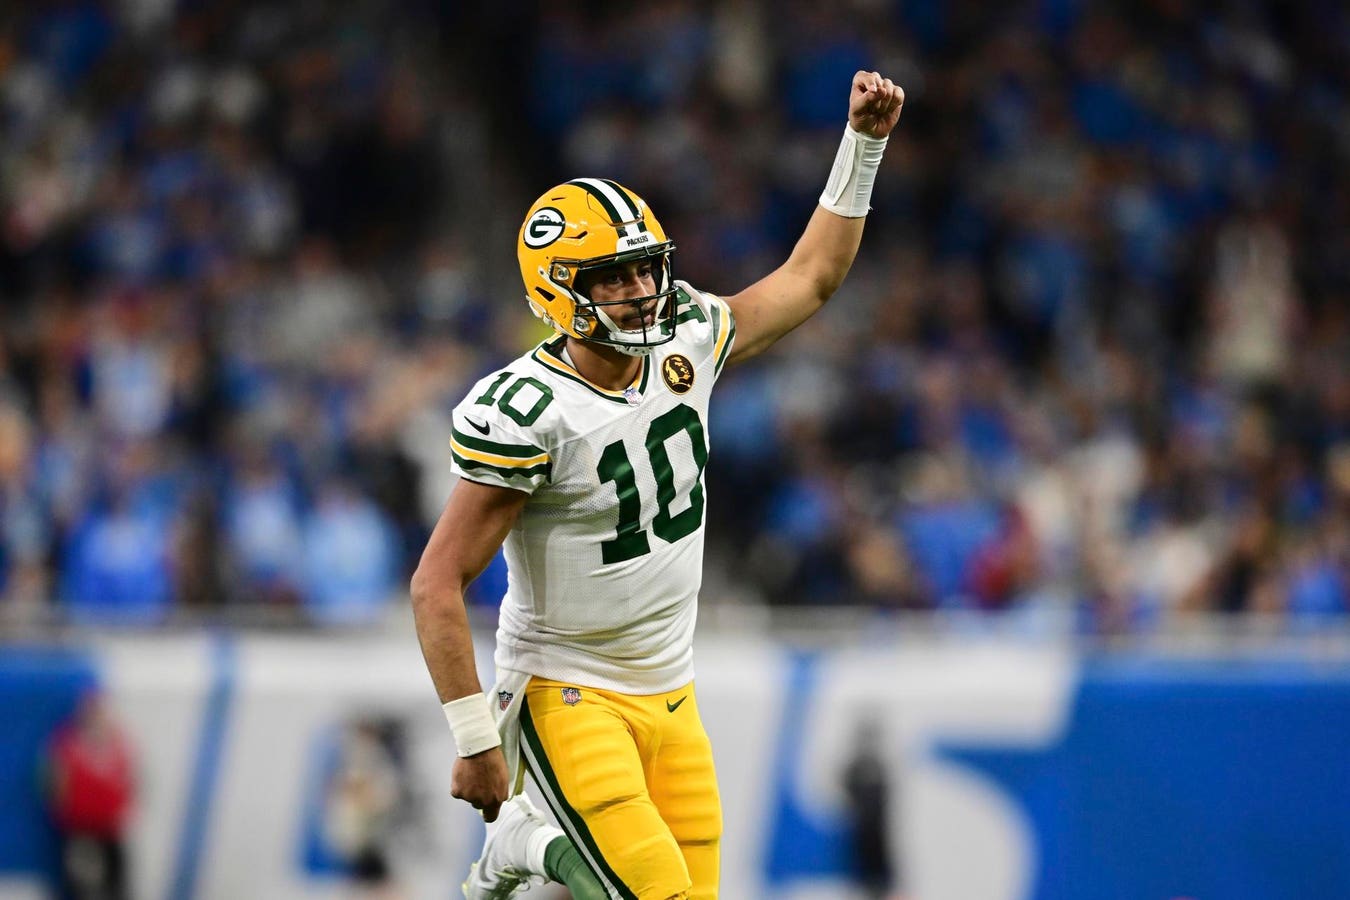 With Jordan Love Signed, The Packers Set Their Sights On A Super Bowl